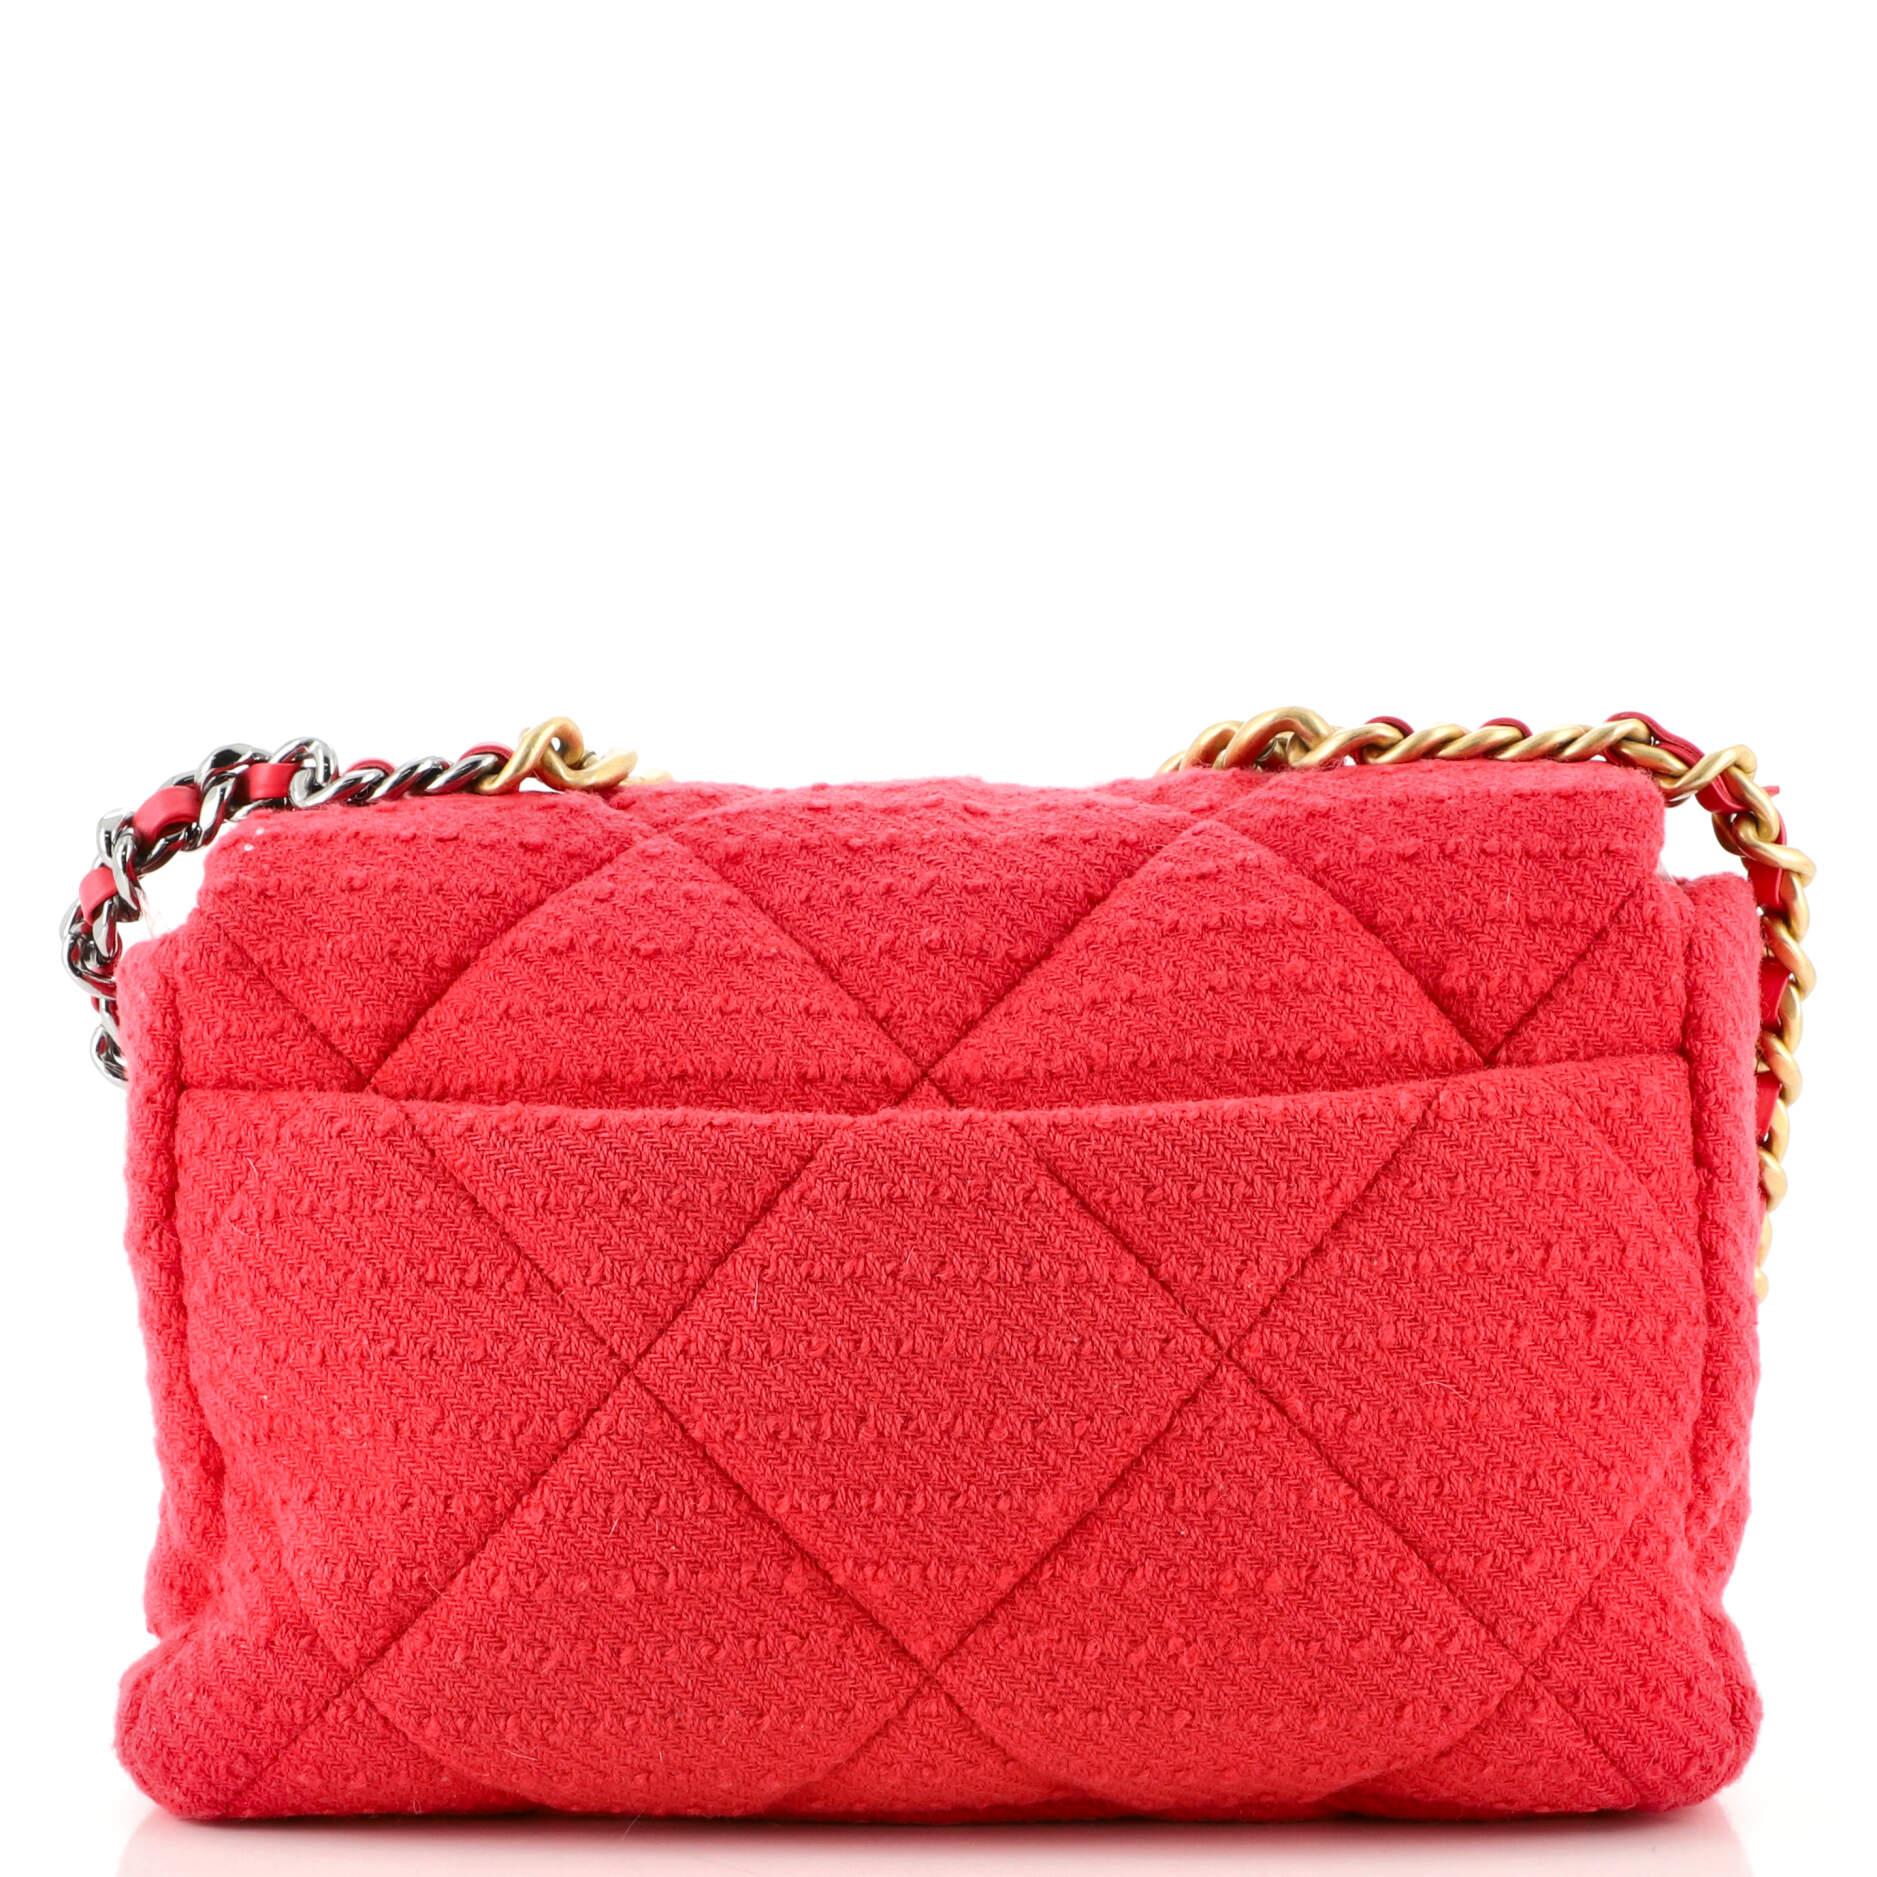 Red Chanel 19 Flap Bag Quilted Tweed Large